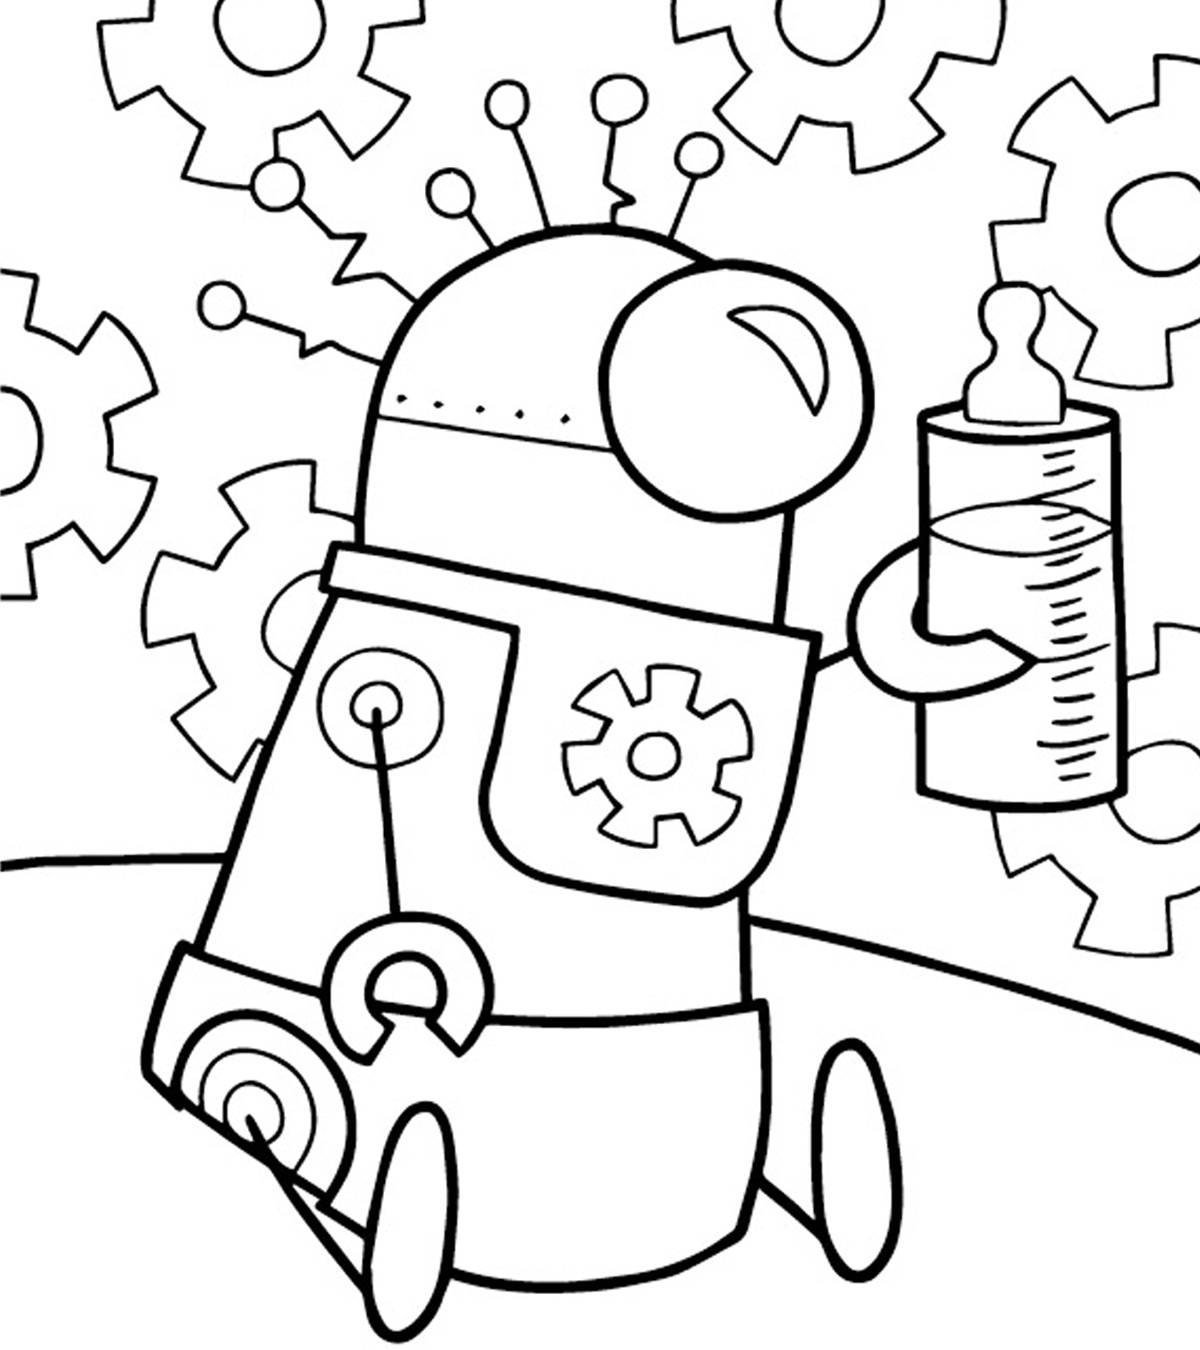 20 Cute Free Printable Robot Coloring Pages Online - roblox superhero coloring pages